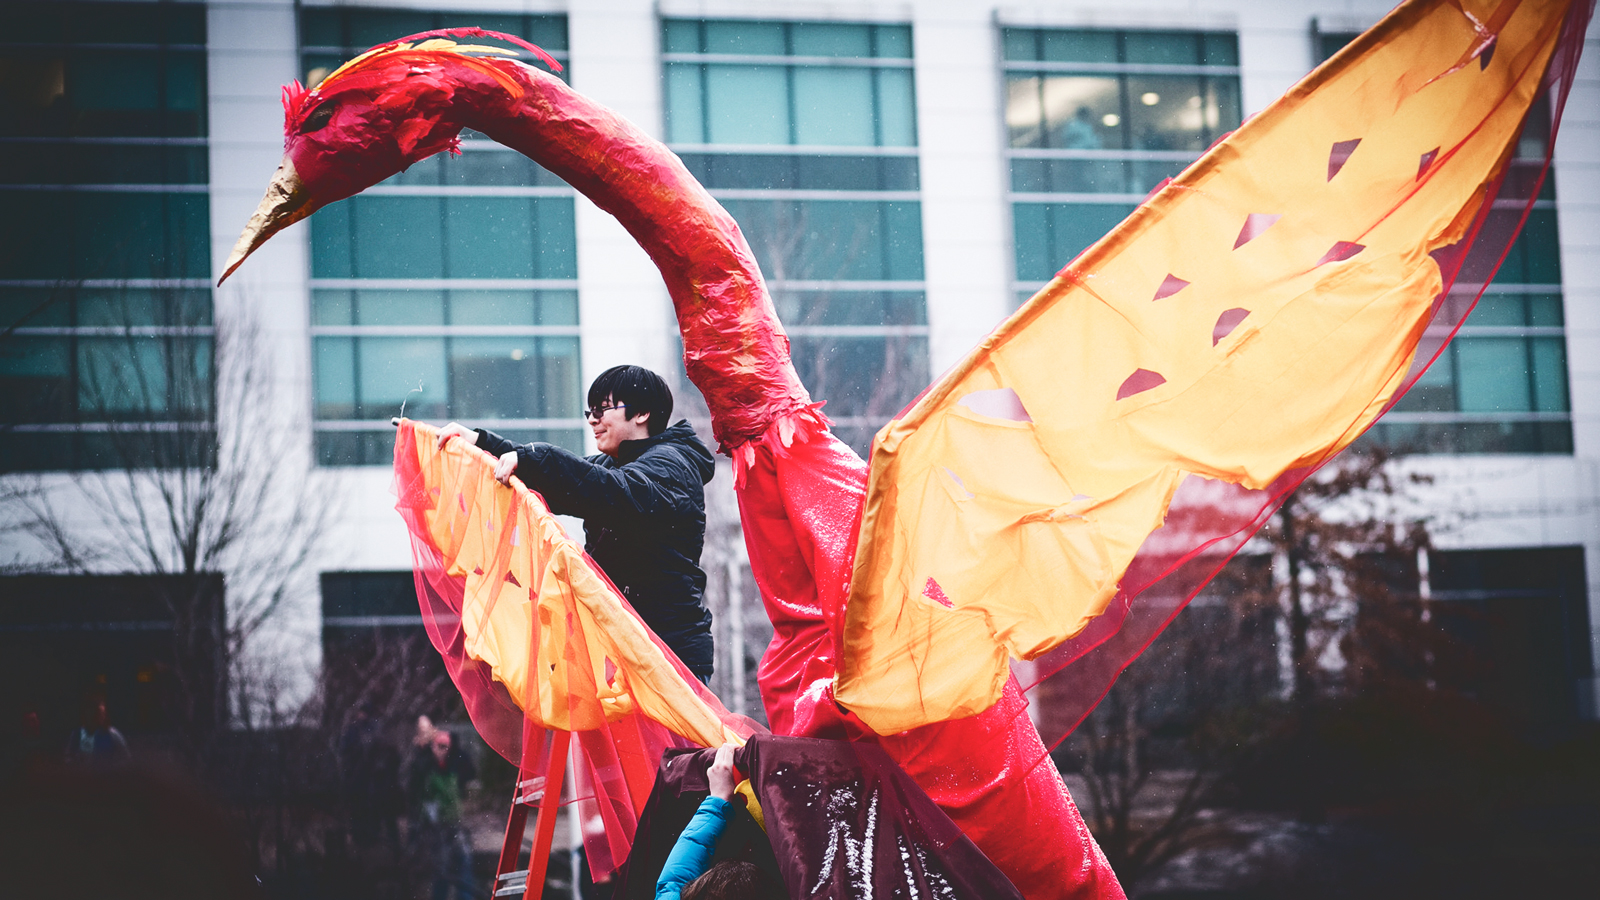 The phoenix confronts the dragon from the Engineering Quad in 2013.